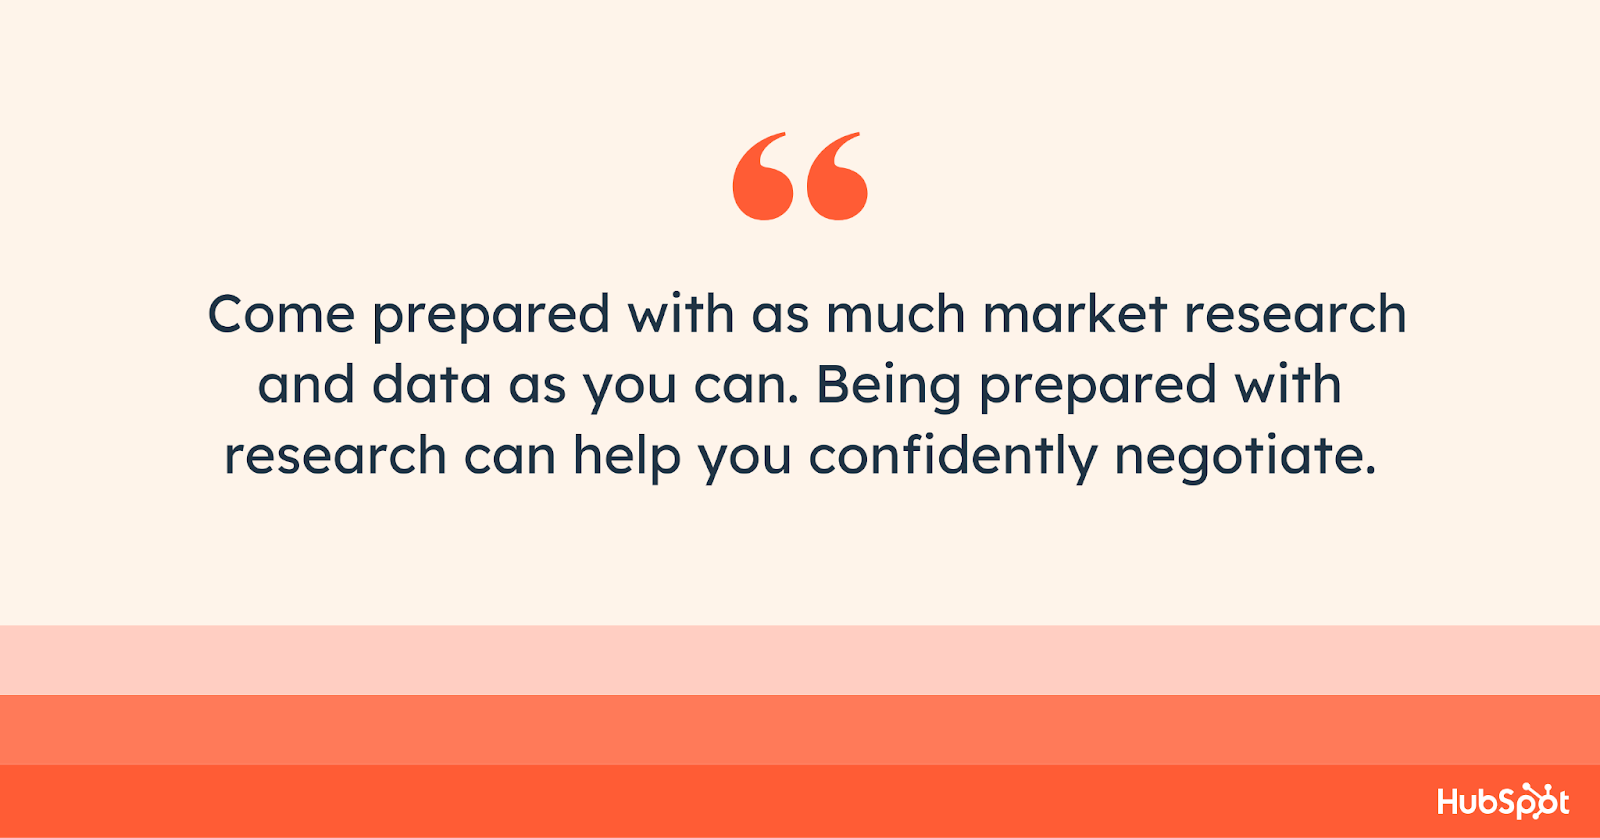 Come prepared with as much market research and data as possible. Being prepared with research can help you confidently negotiate